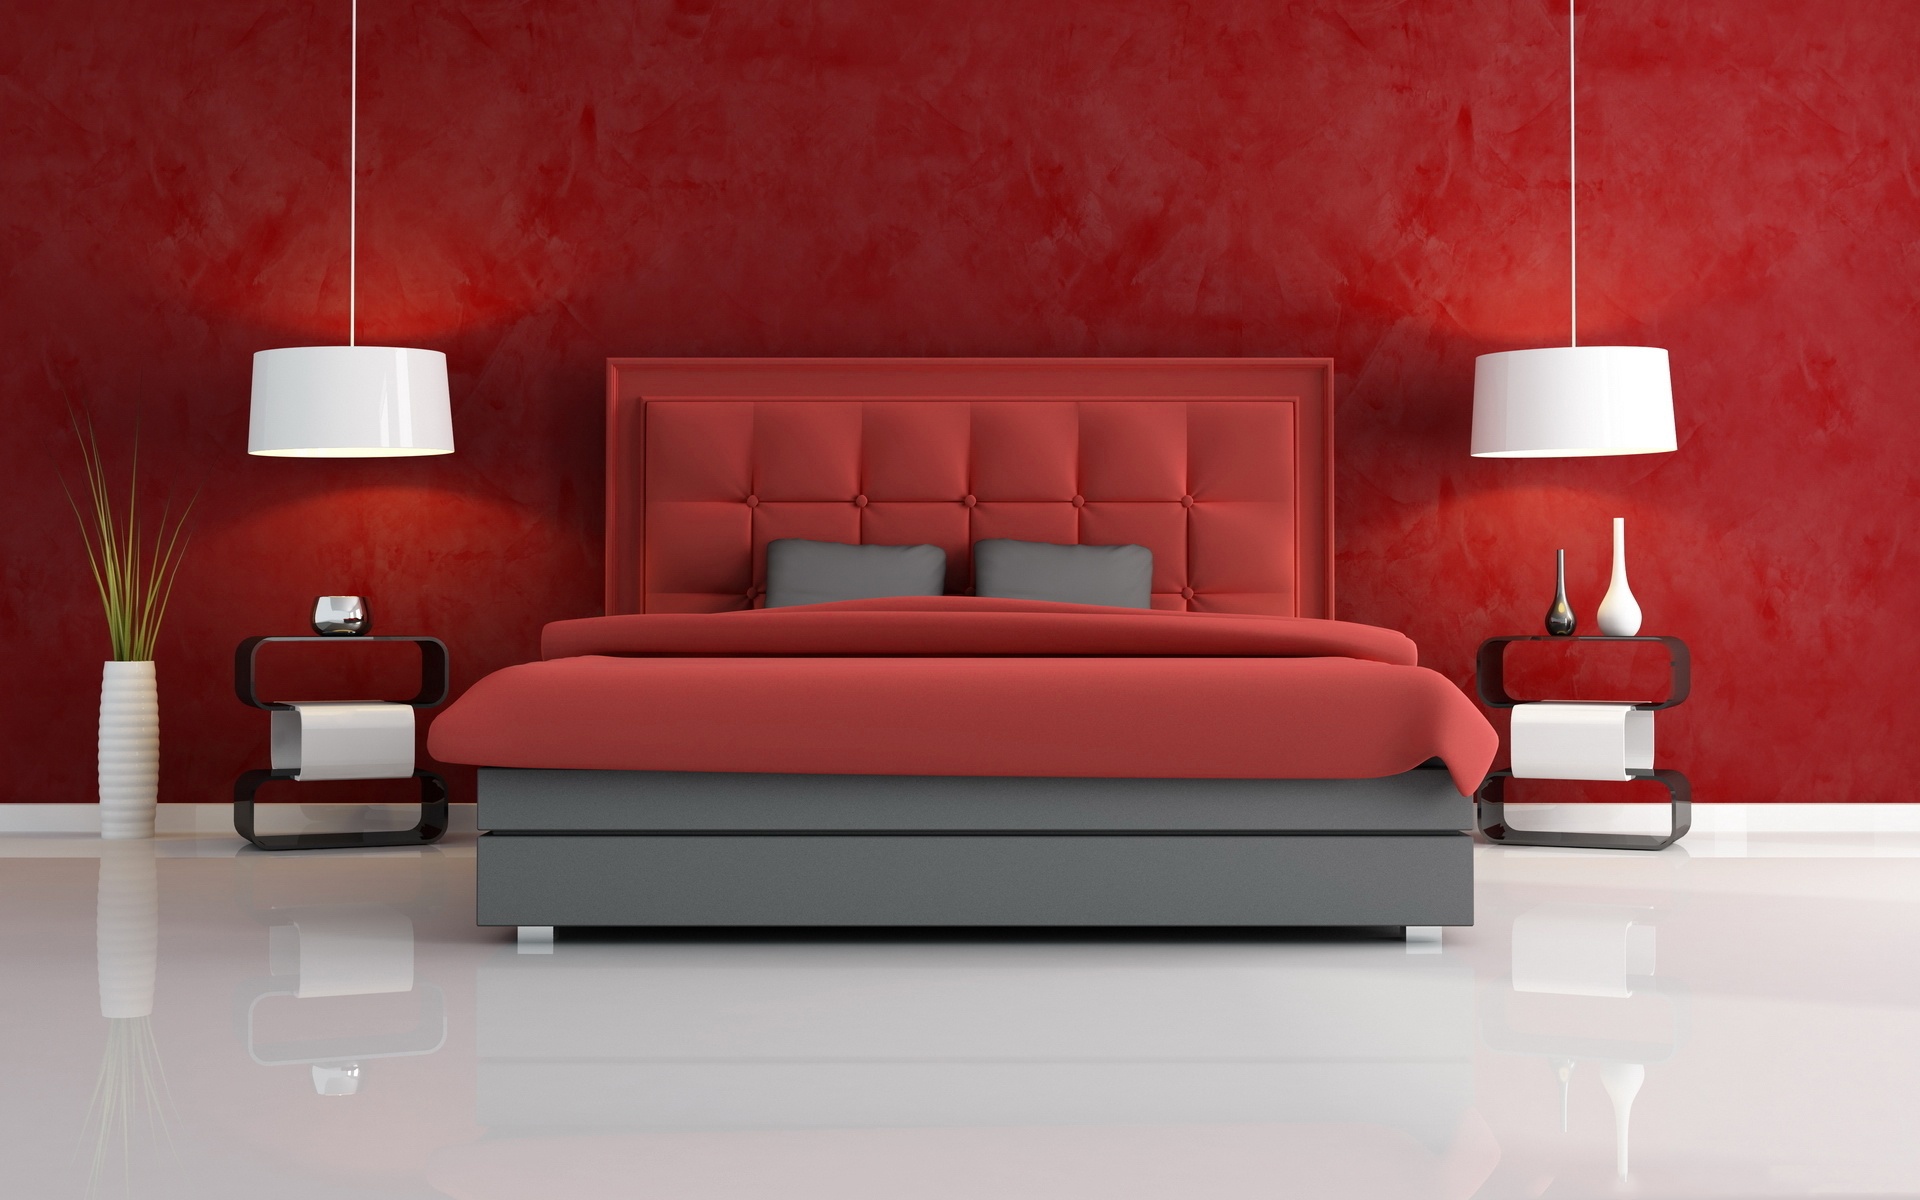 General 1920x1200 red bed room interior